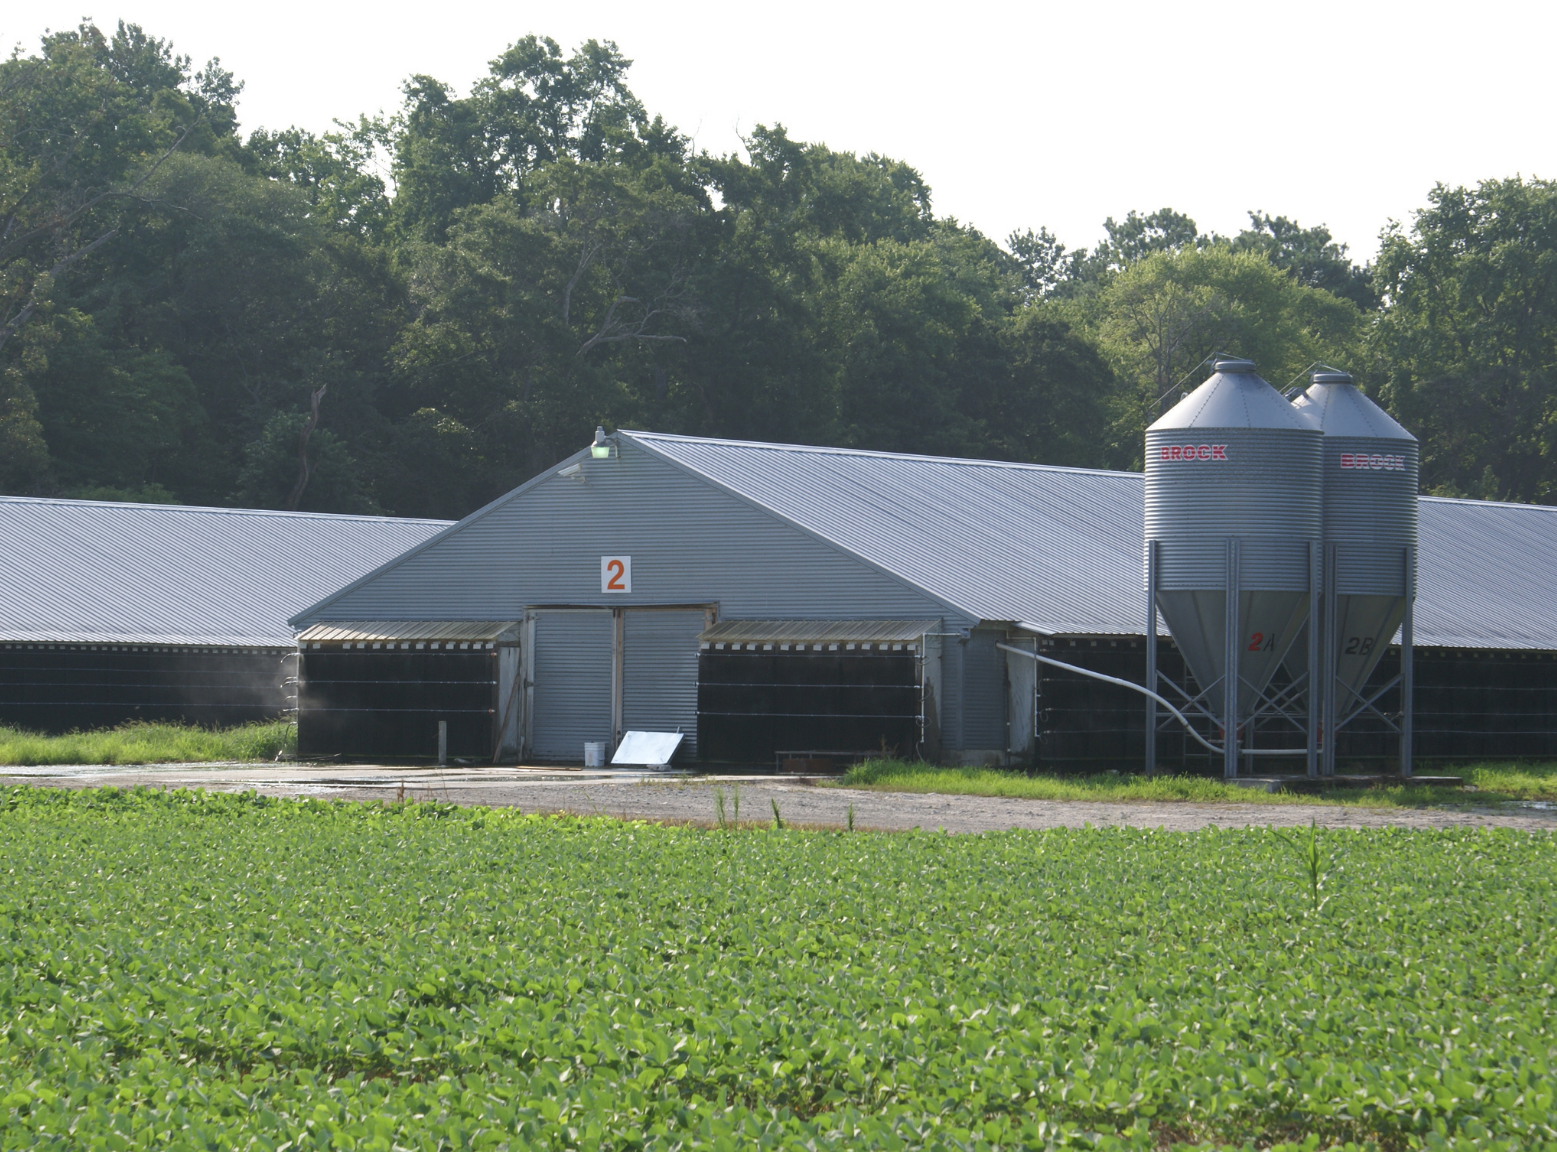 Chicken house with grain bins behind a field of soybeans in the summer